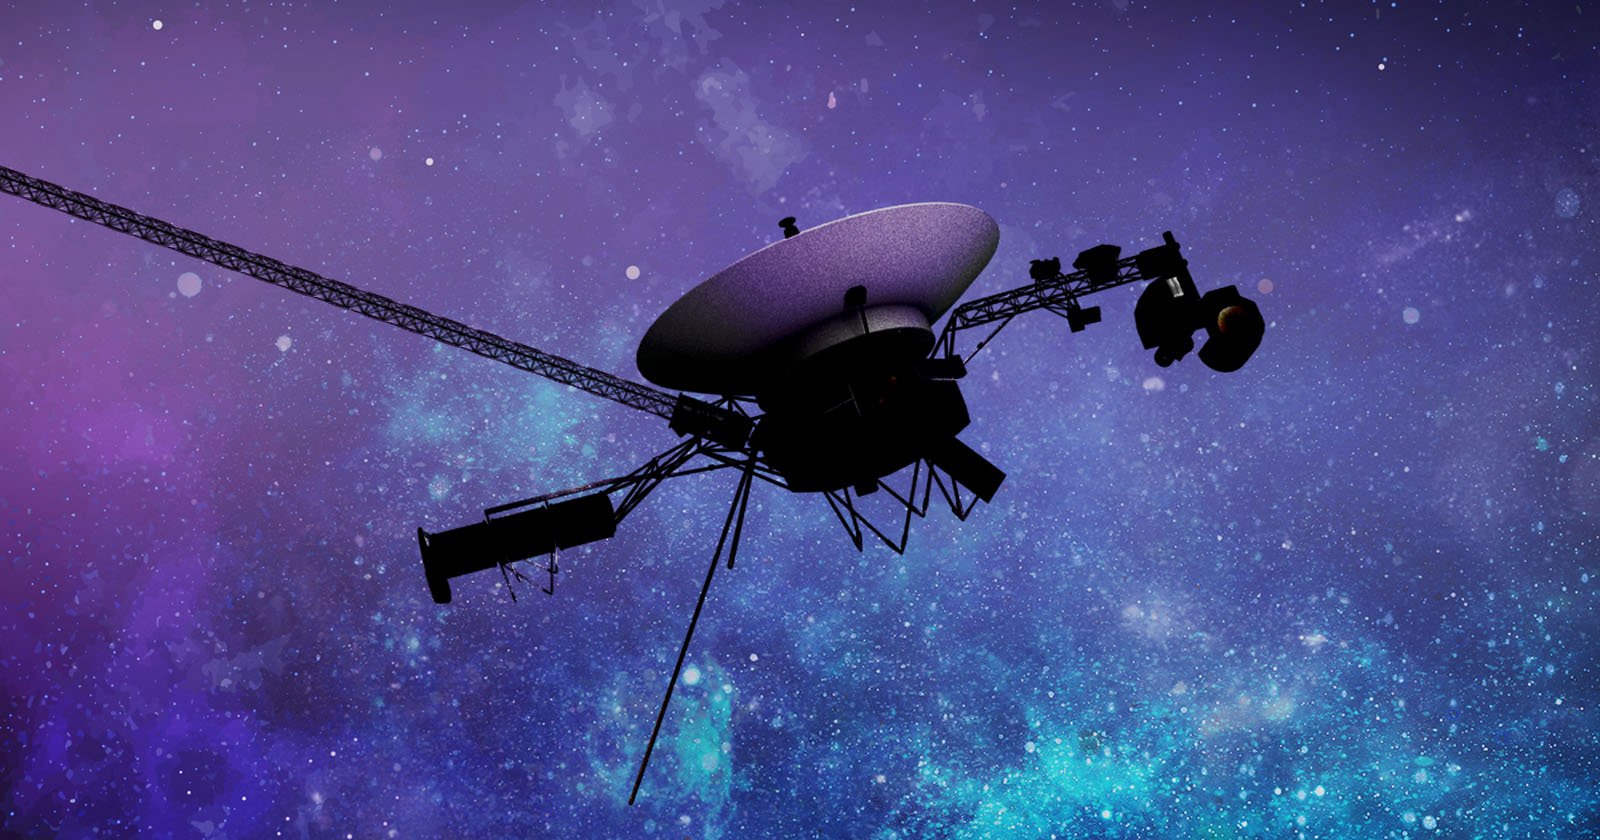 NASA Engineers Are Desperately Trying to Save Voyager 1, the Most Distant Spacecraft Ever